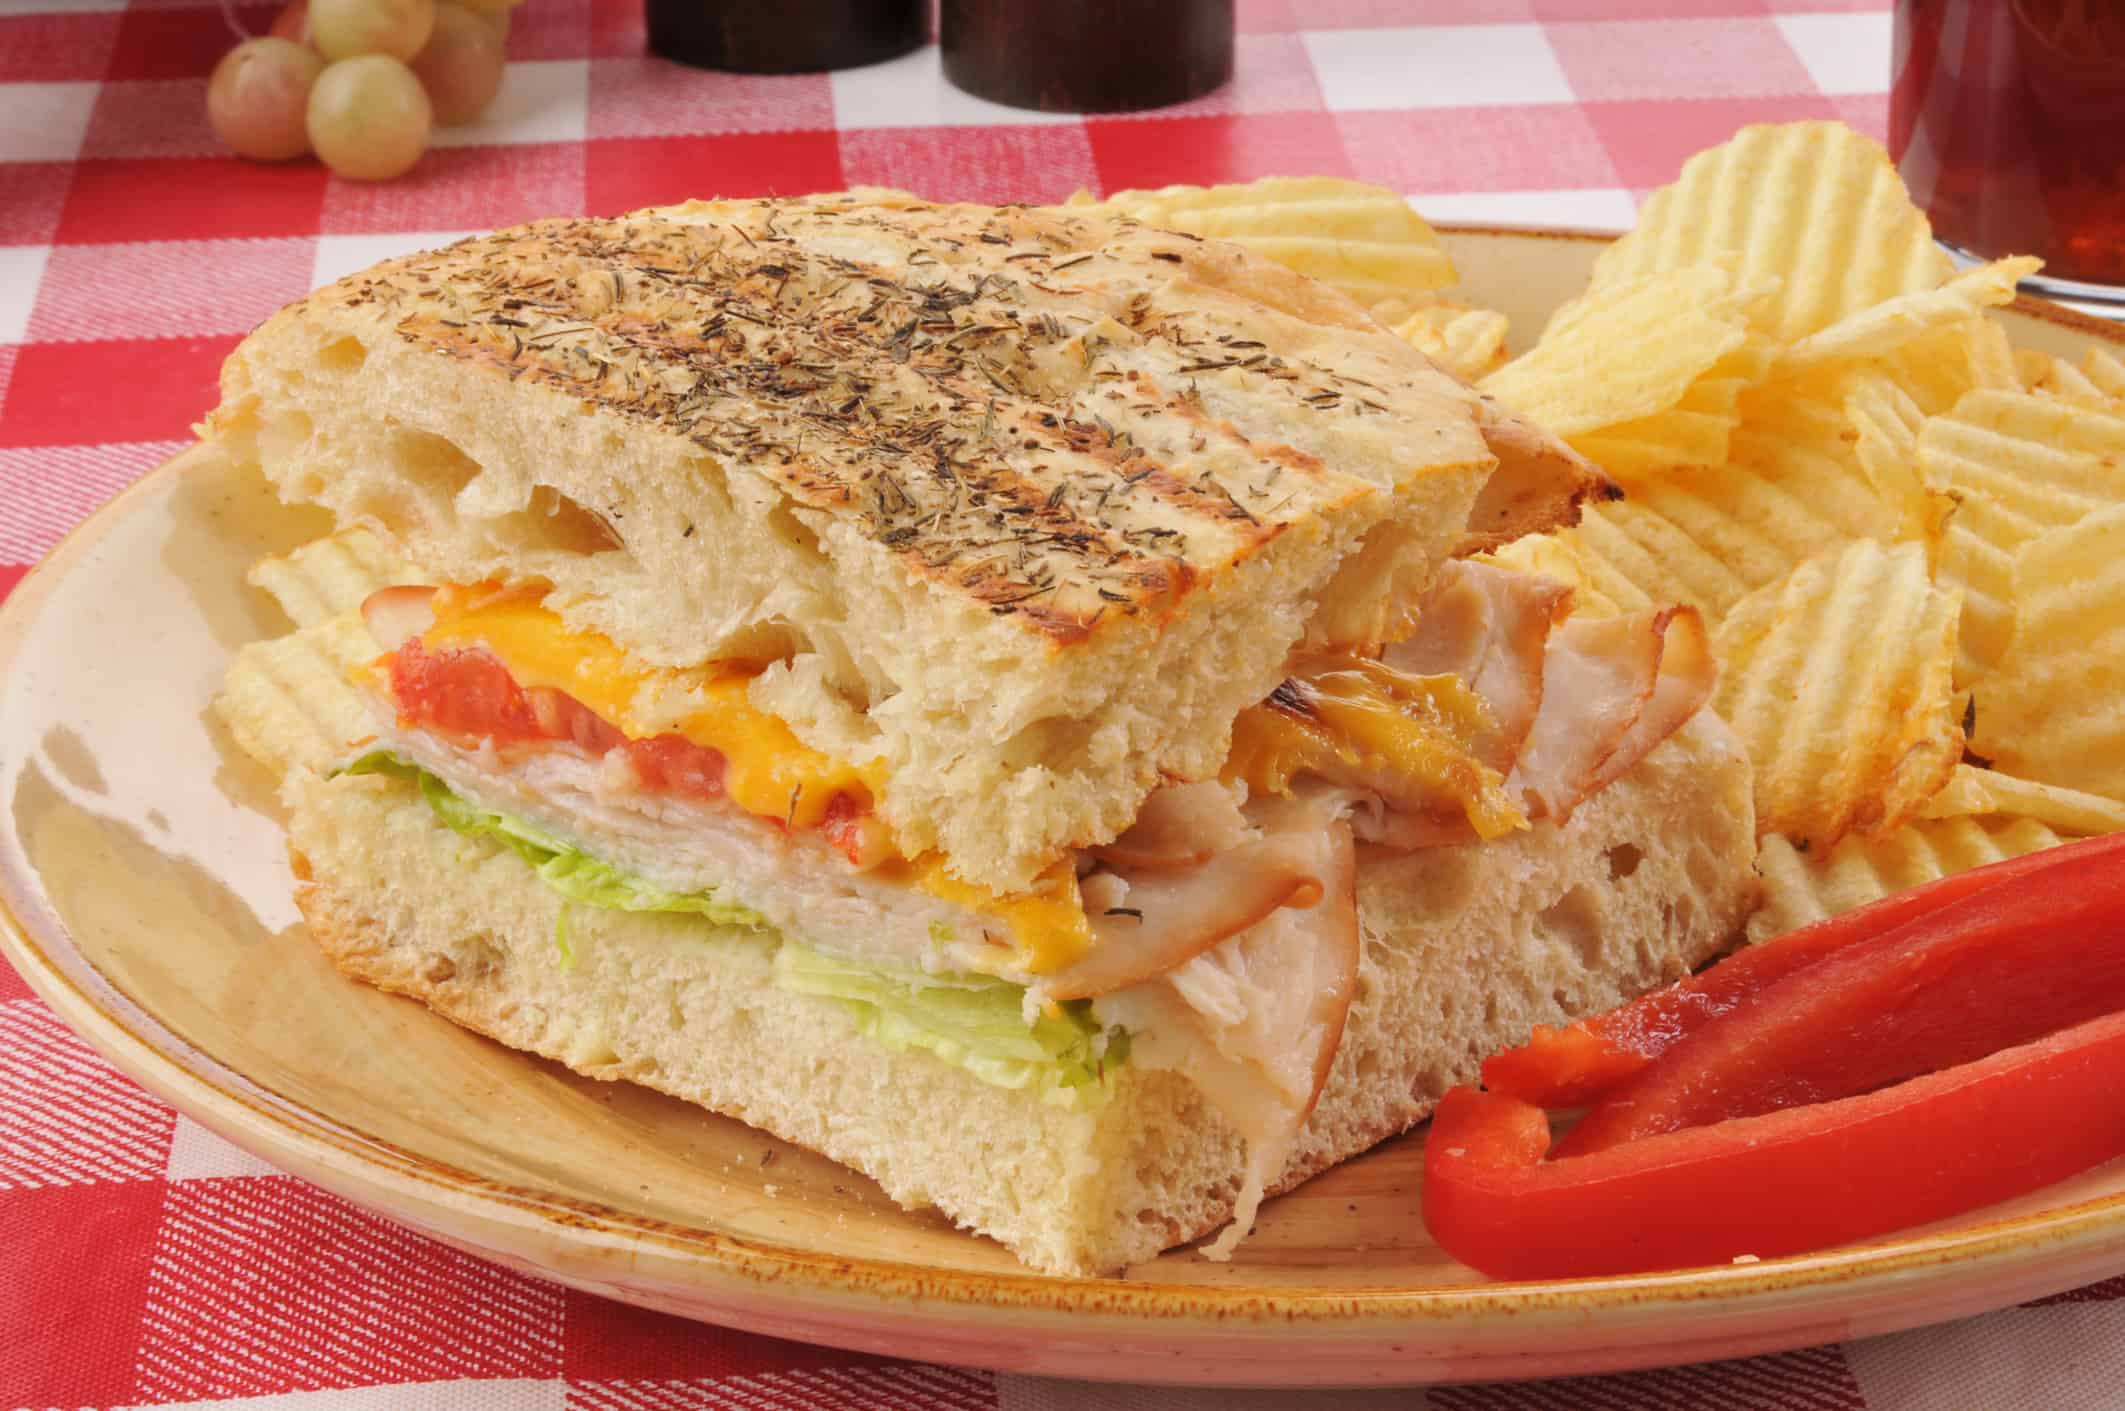 A ham and cheese panini on a picnic table with pototo chips